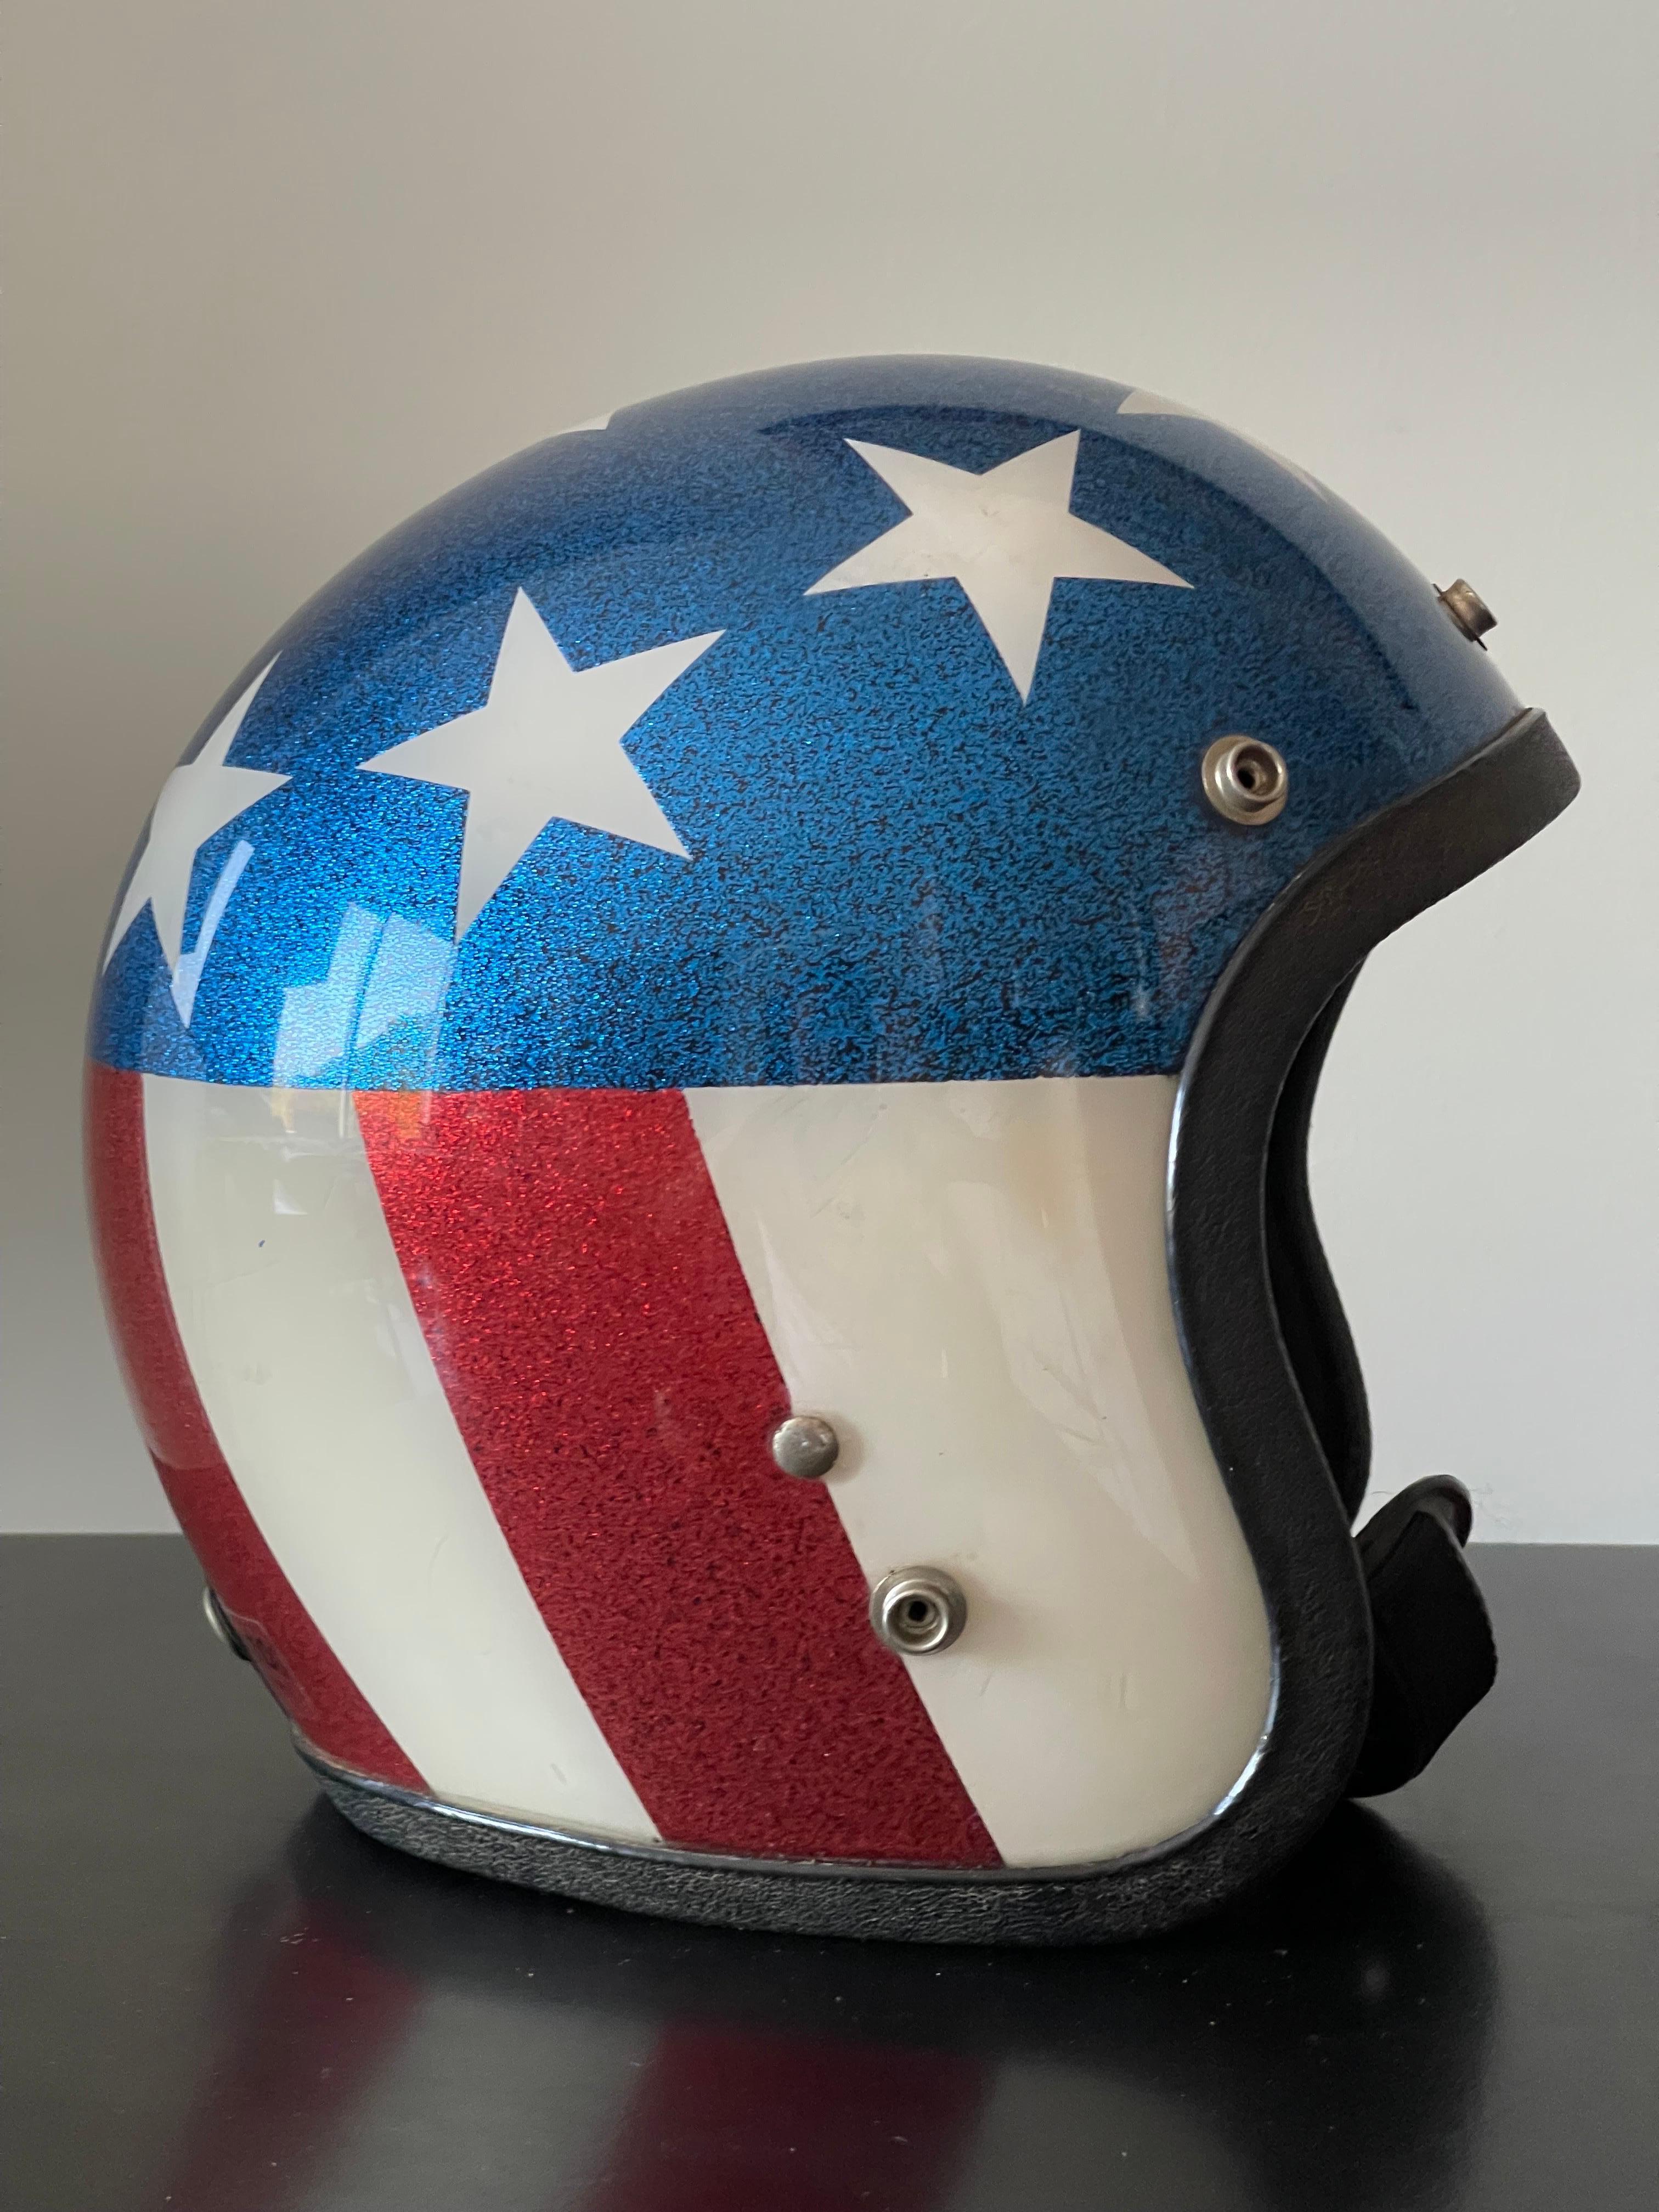 Mid-Century Modern 1970's American Flag Motorcycle Helmet of Evil Kneivel and Easy Rider